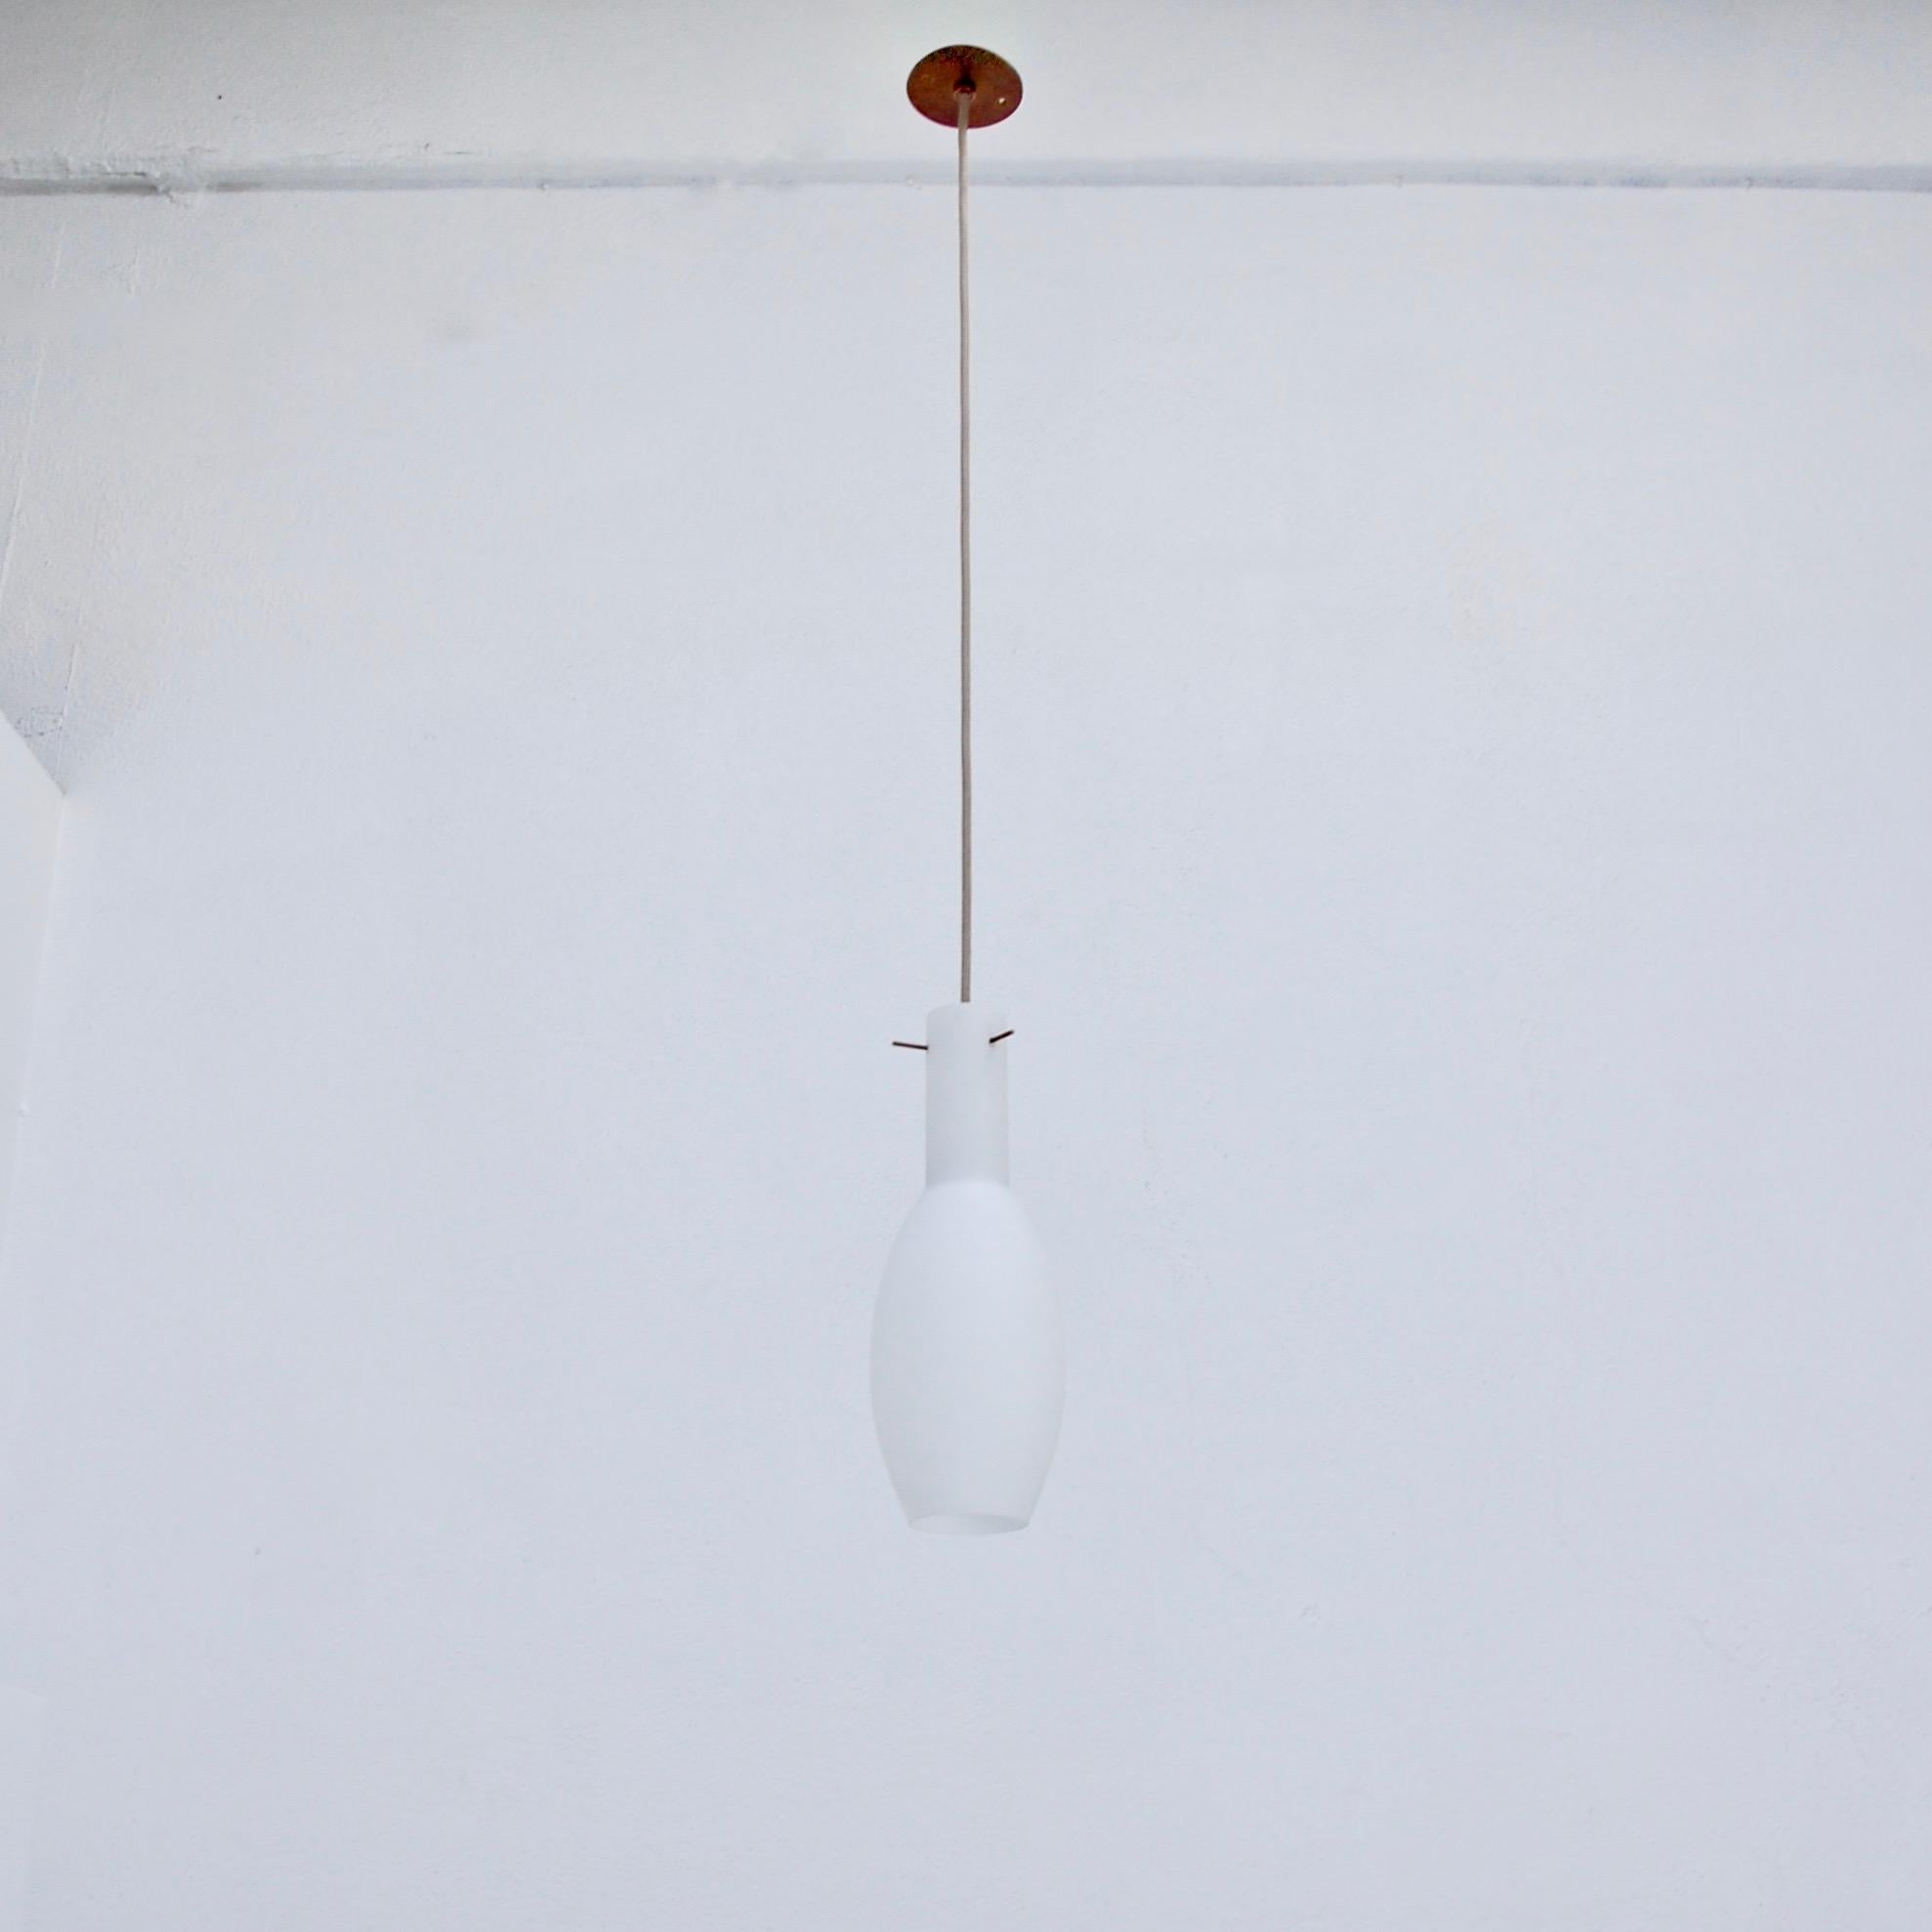 (2) Elegant narrow satin opal glass Italian pendants from 1950s Italy in glass and brass. Partially restored. Wired for use in the US with a single E26 medium based socket in each pendant. Light bulbs included in order. Overall drop adjustable upon